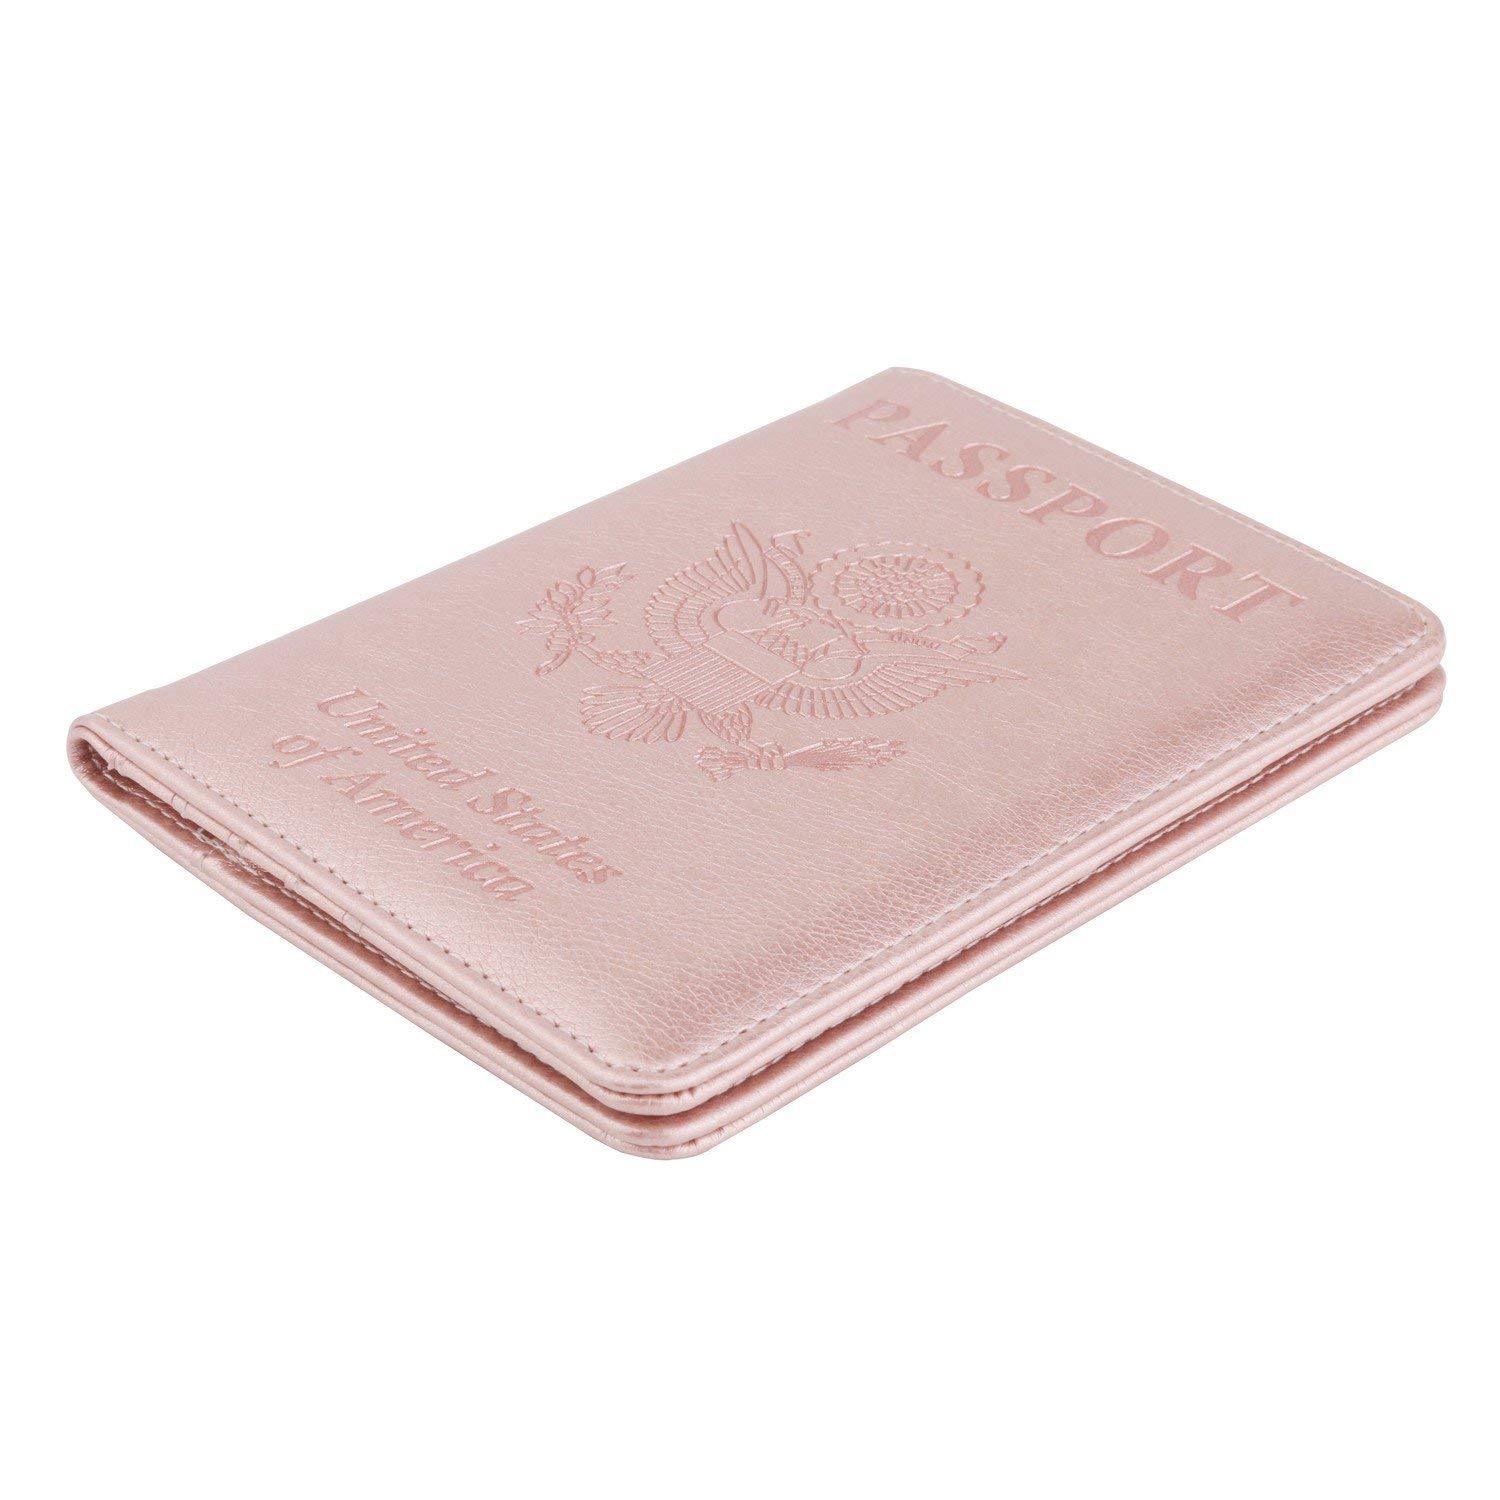 Rose Gold MoKo Passport Holder PU leather Travel Case Cover for Passport 